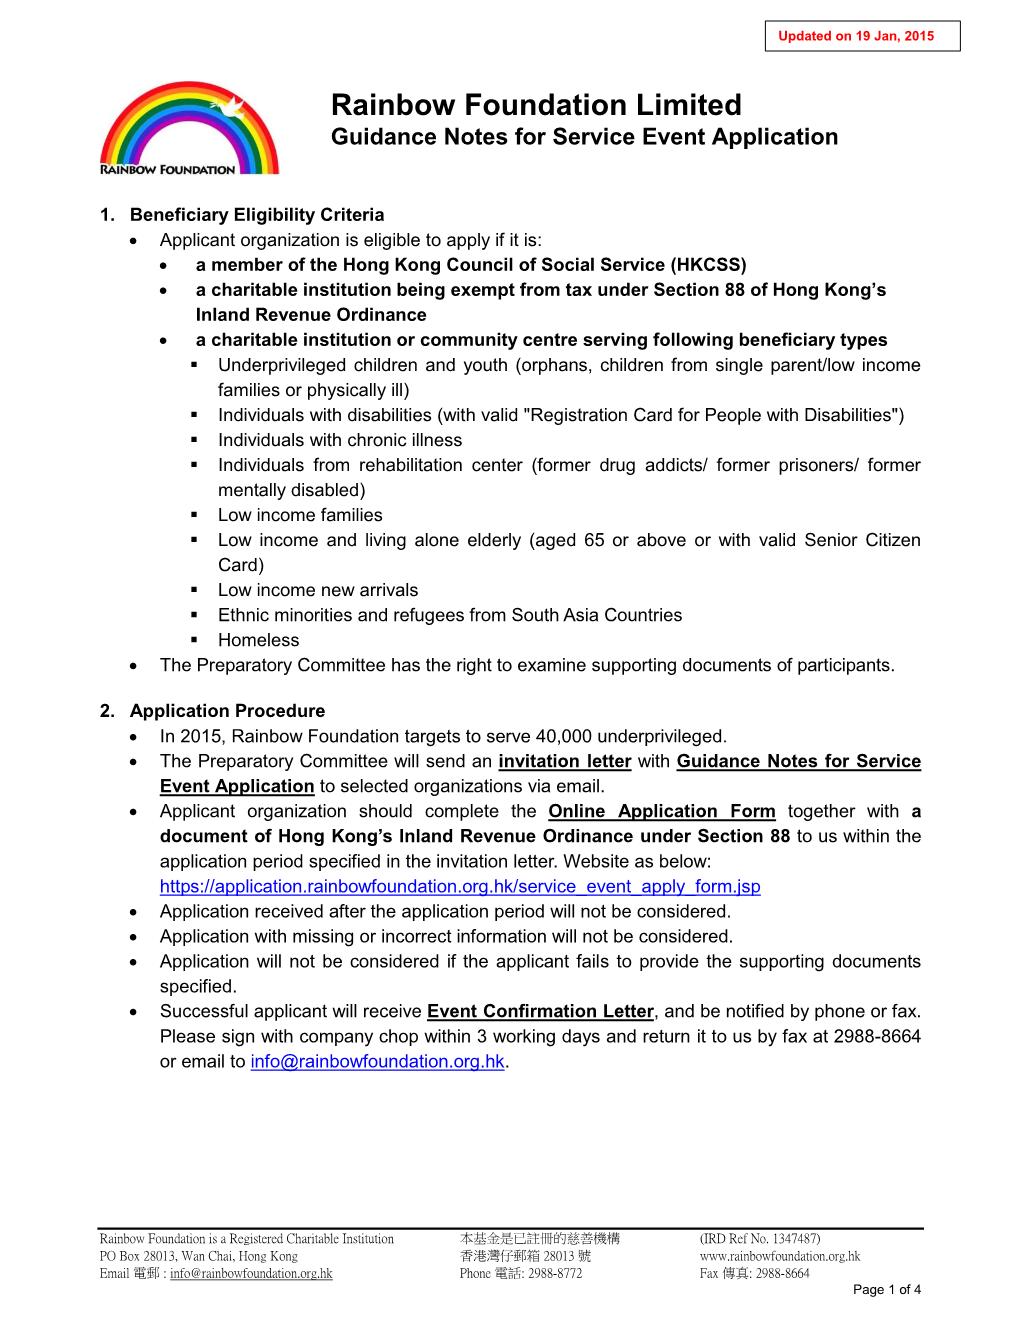 Rainbow Foundation Limited Guidance Notes for Service Event Application